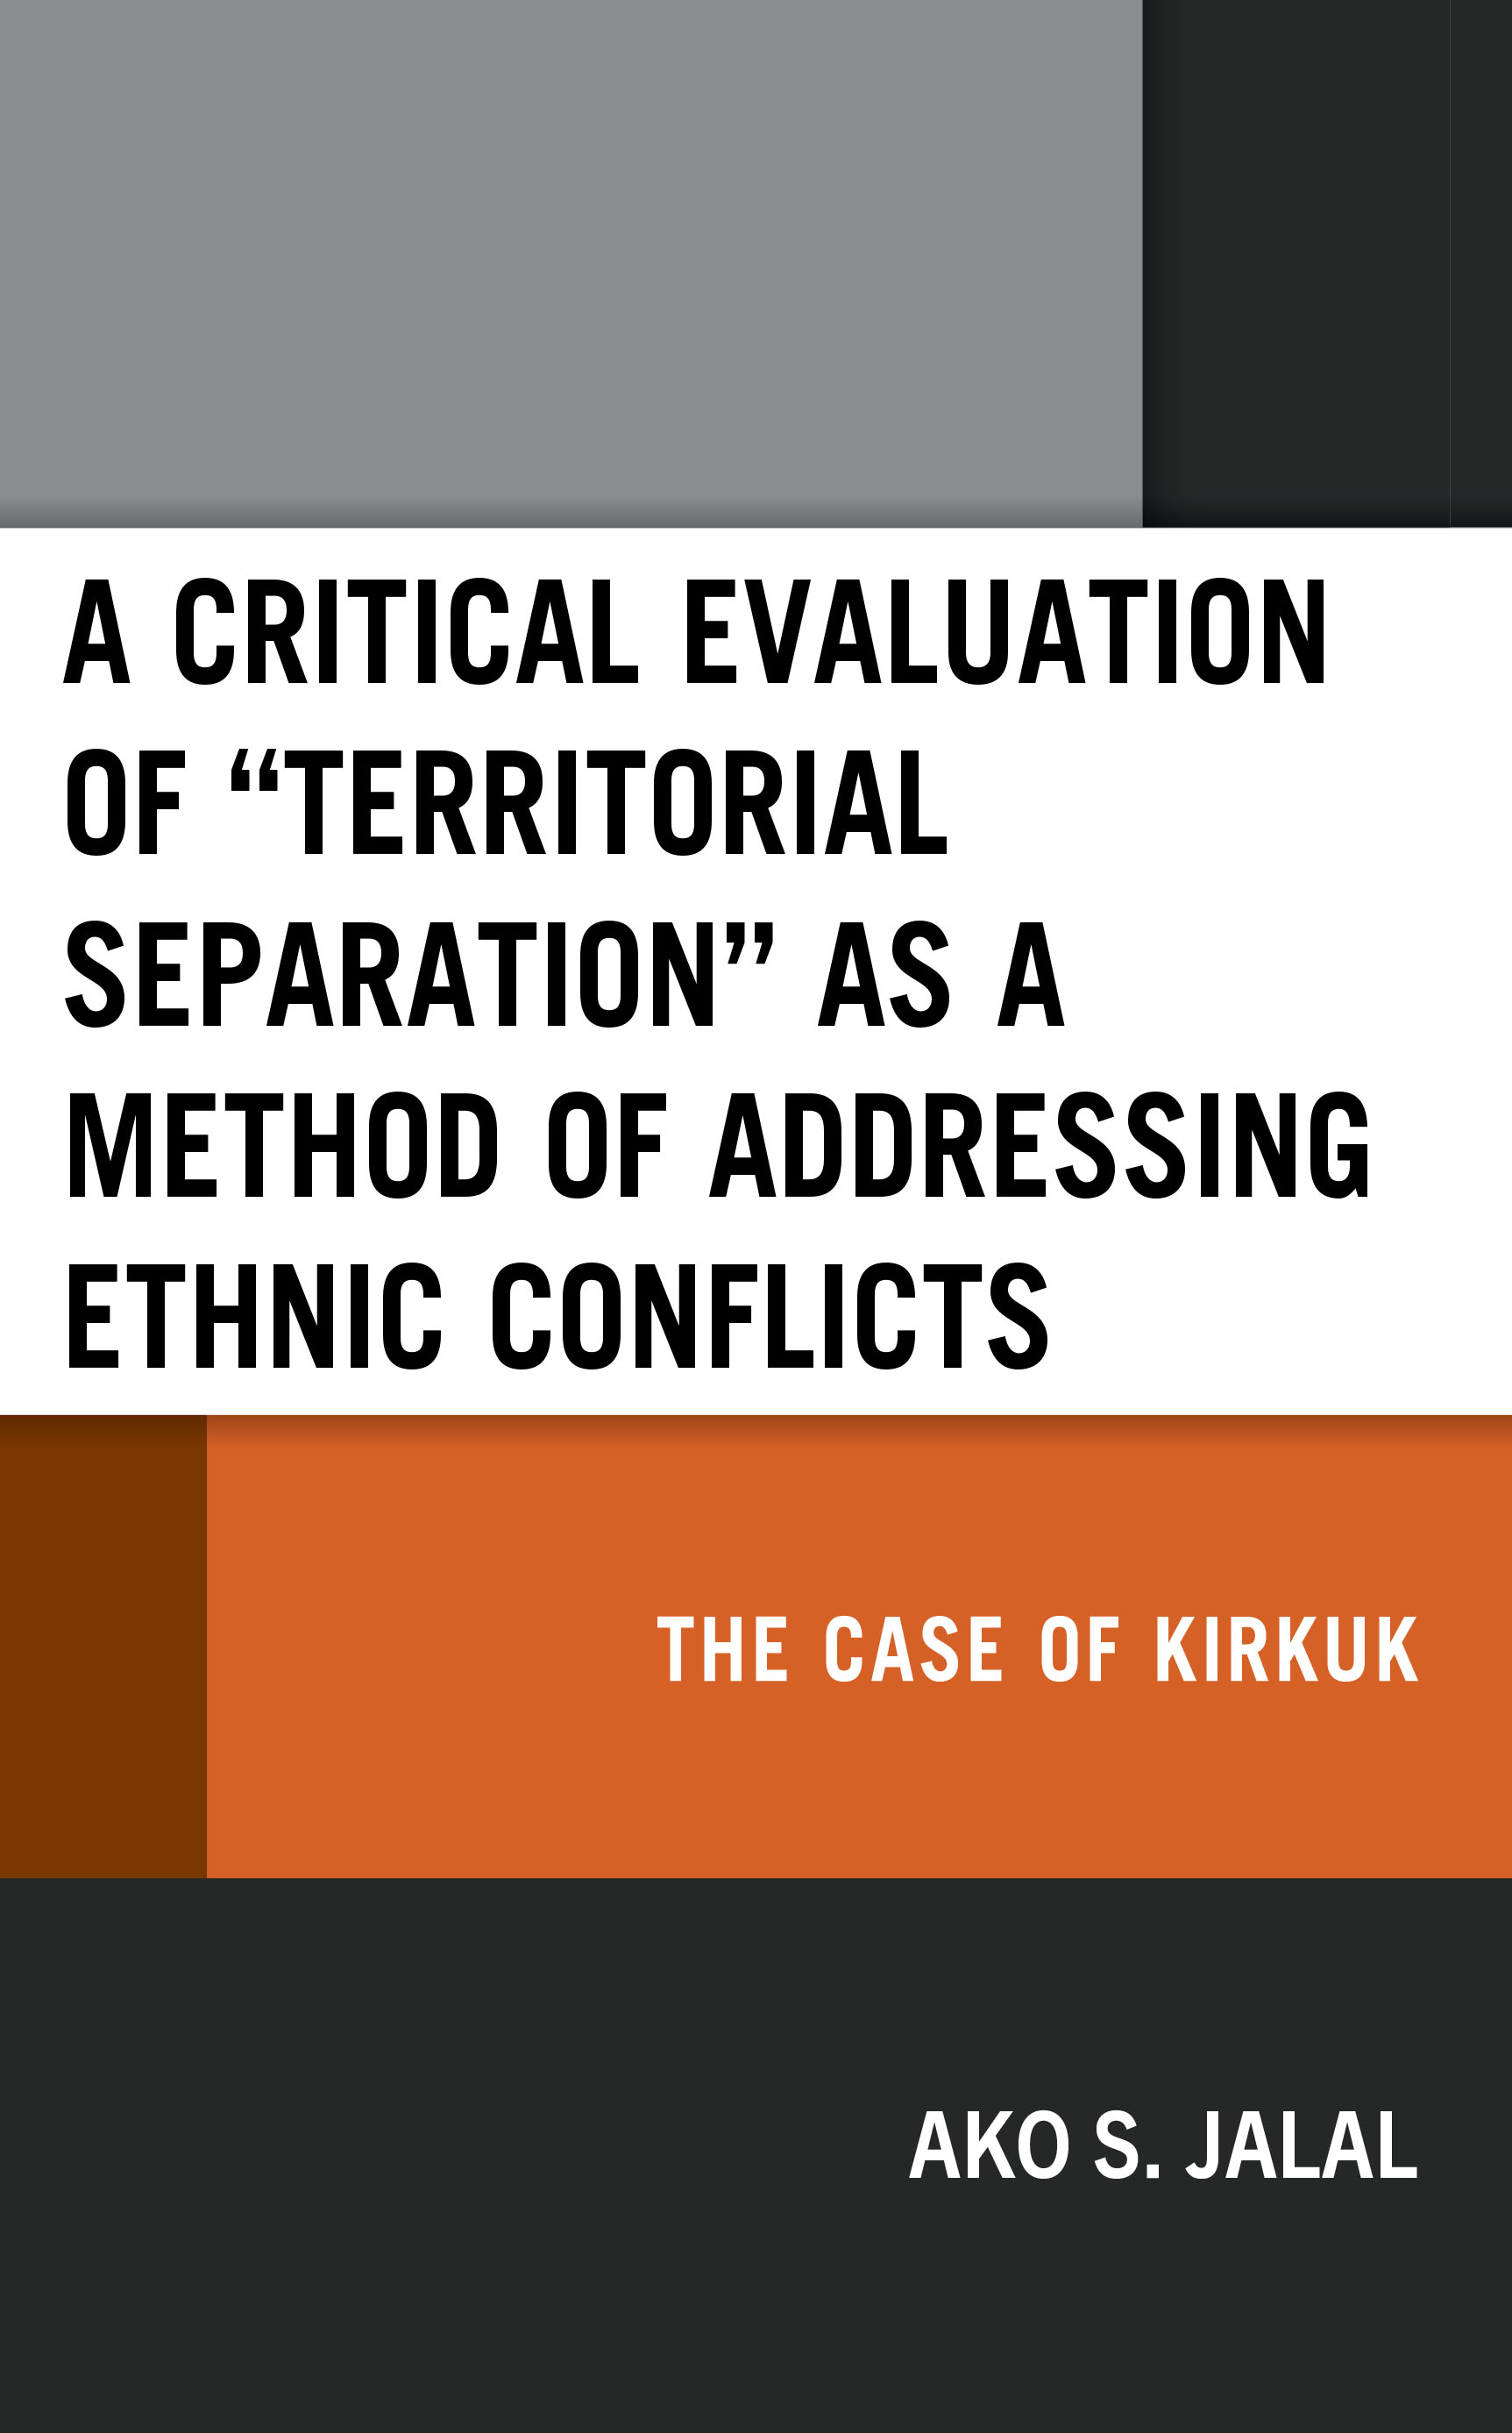 A Critical Evaluation of “Territorial Separation” as a Method of Addressing Ethnic Conflicts: The Case of Kirkuk